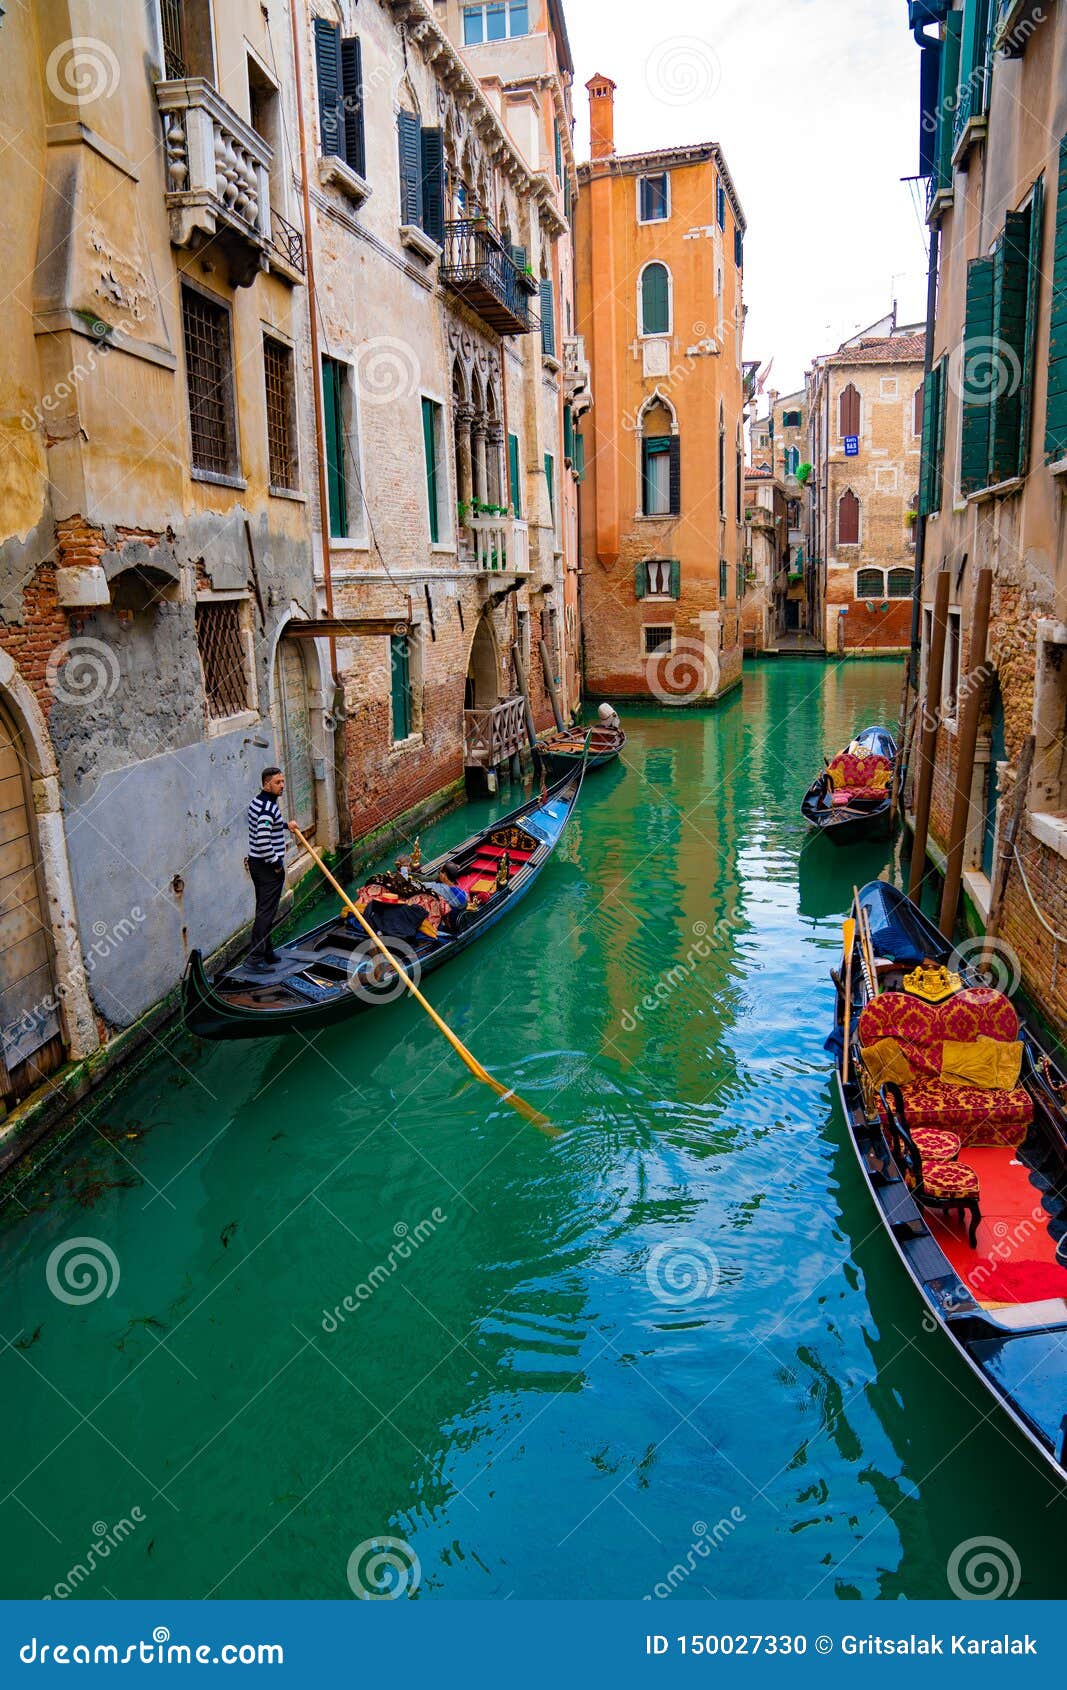 Italy - May 20, 2019: View on Canal with Gondola Boat and Motorboat ...